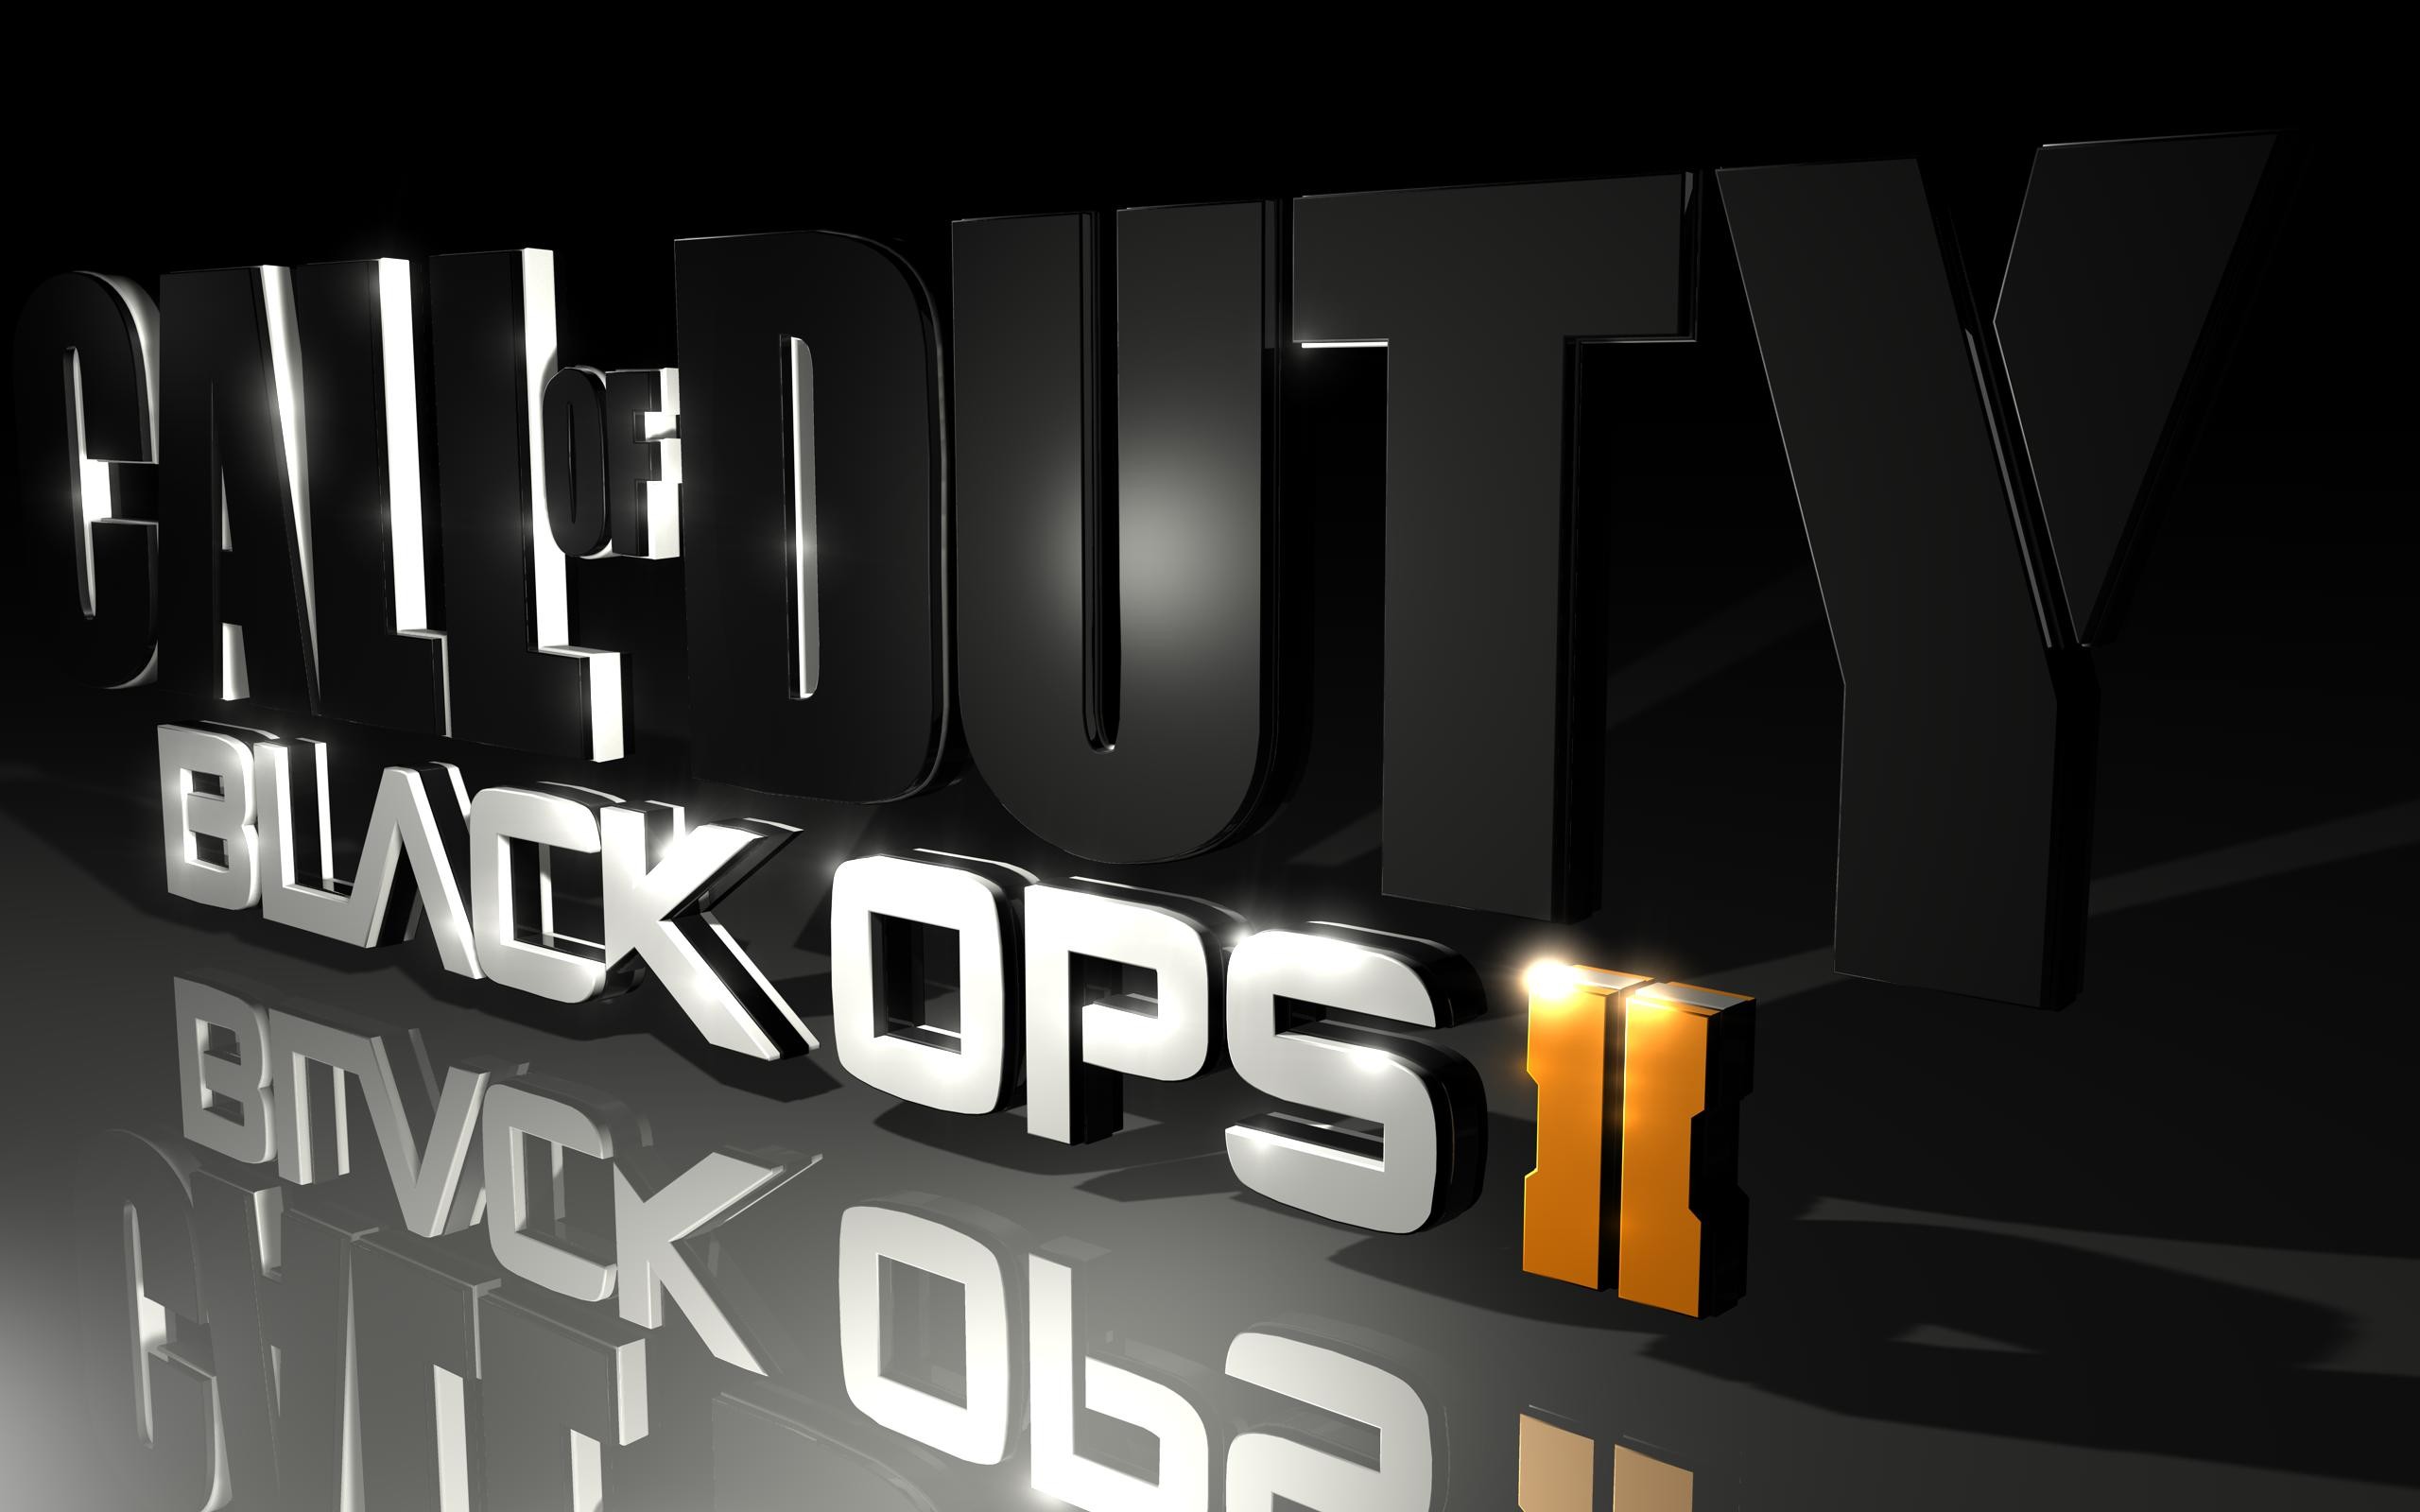 Black Ops Wallpapers – Full HD wallpaper search